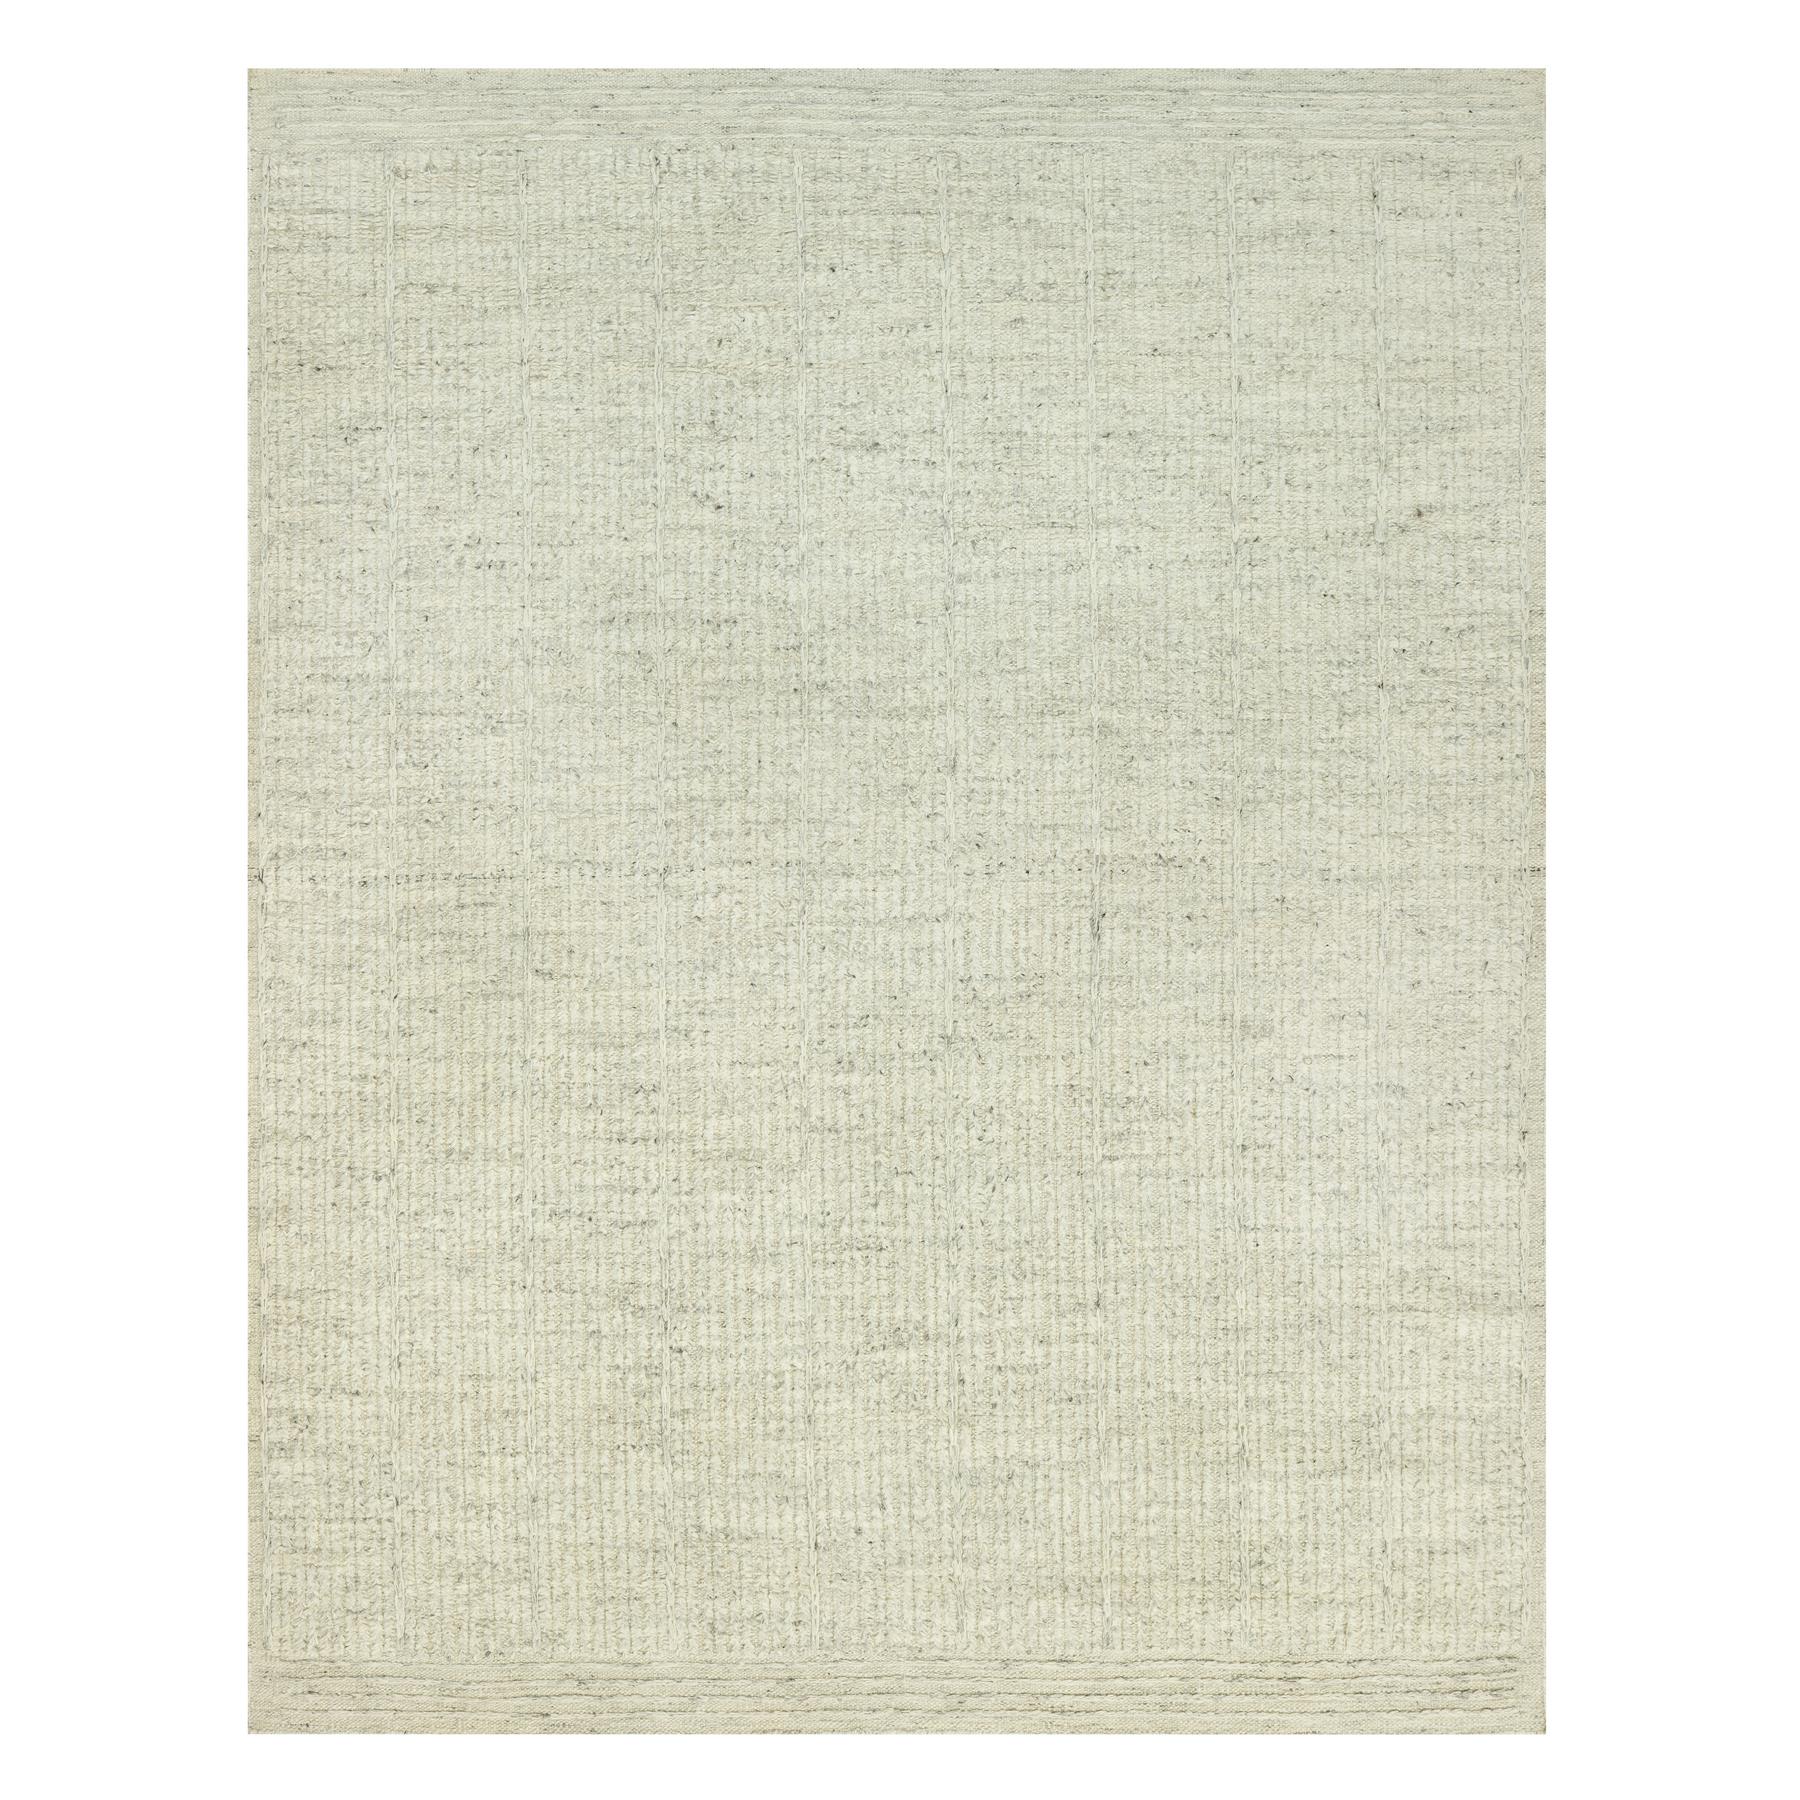 traditional Wool Hand-Woven Area Rug 9'3